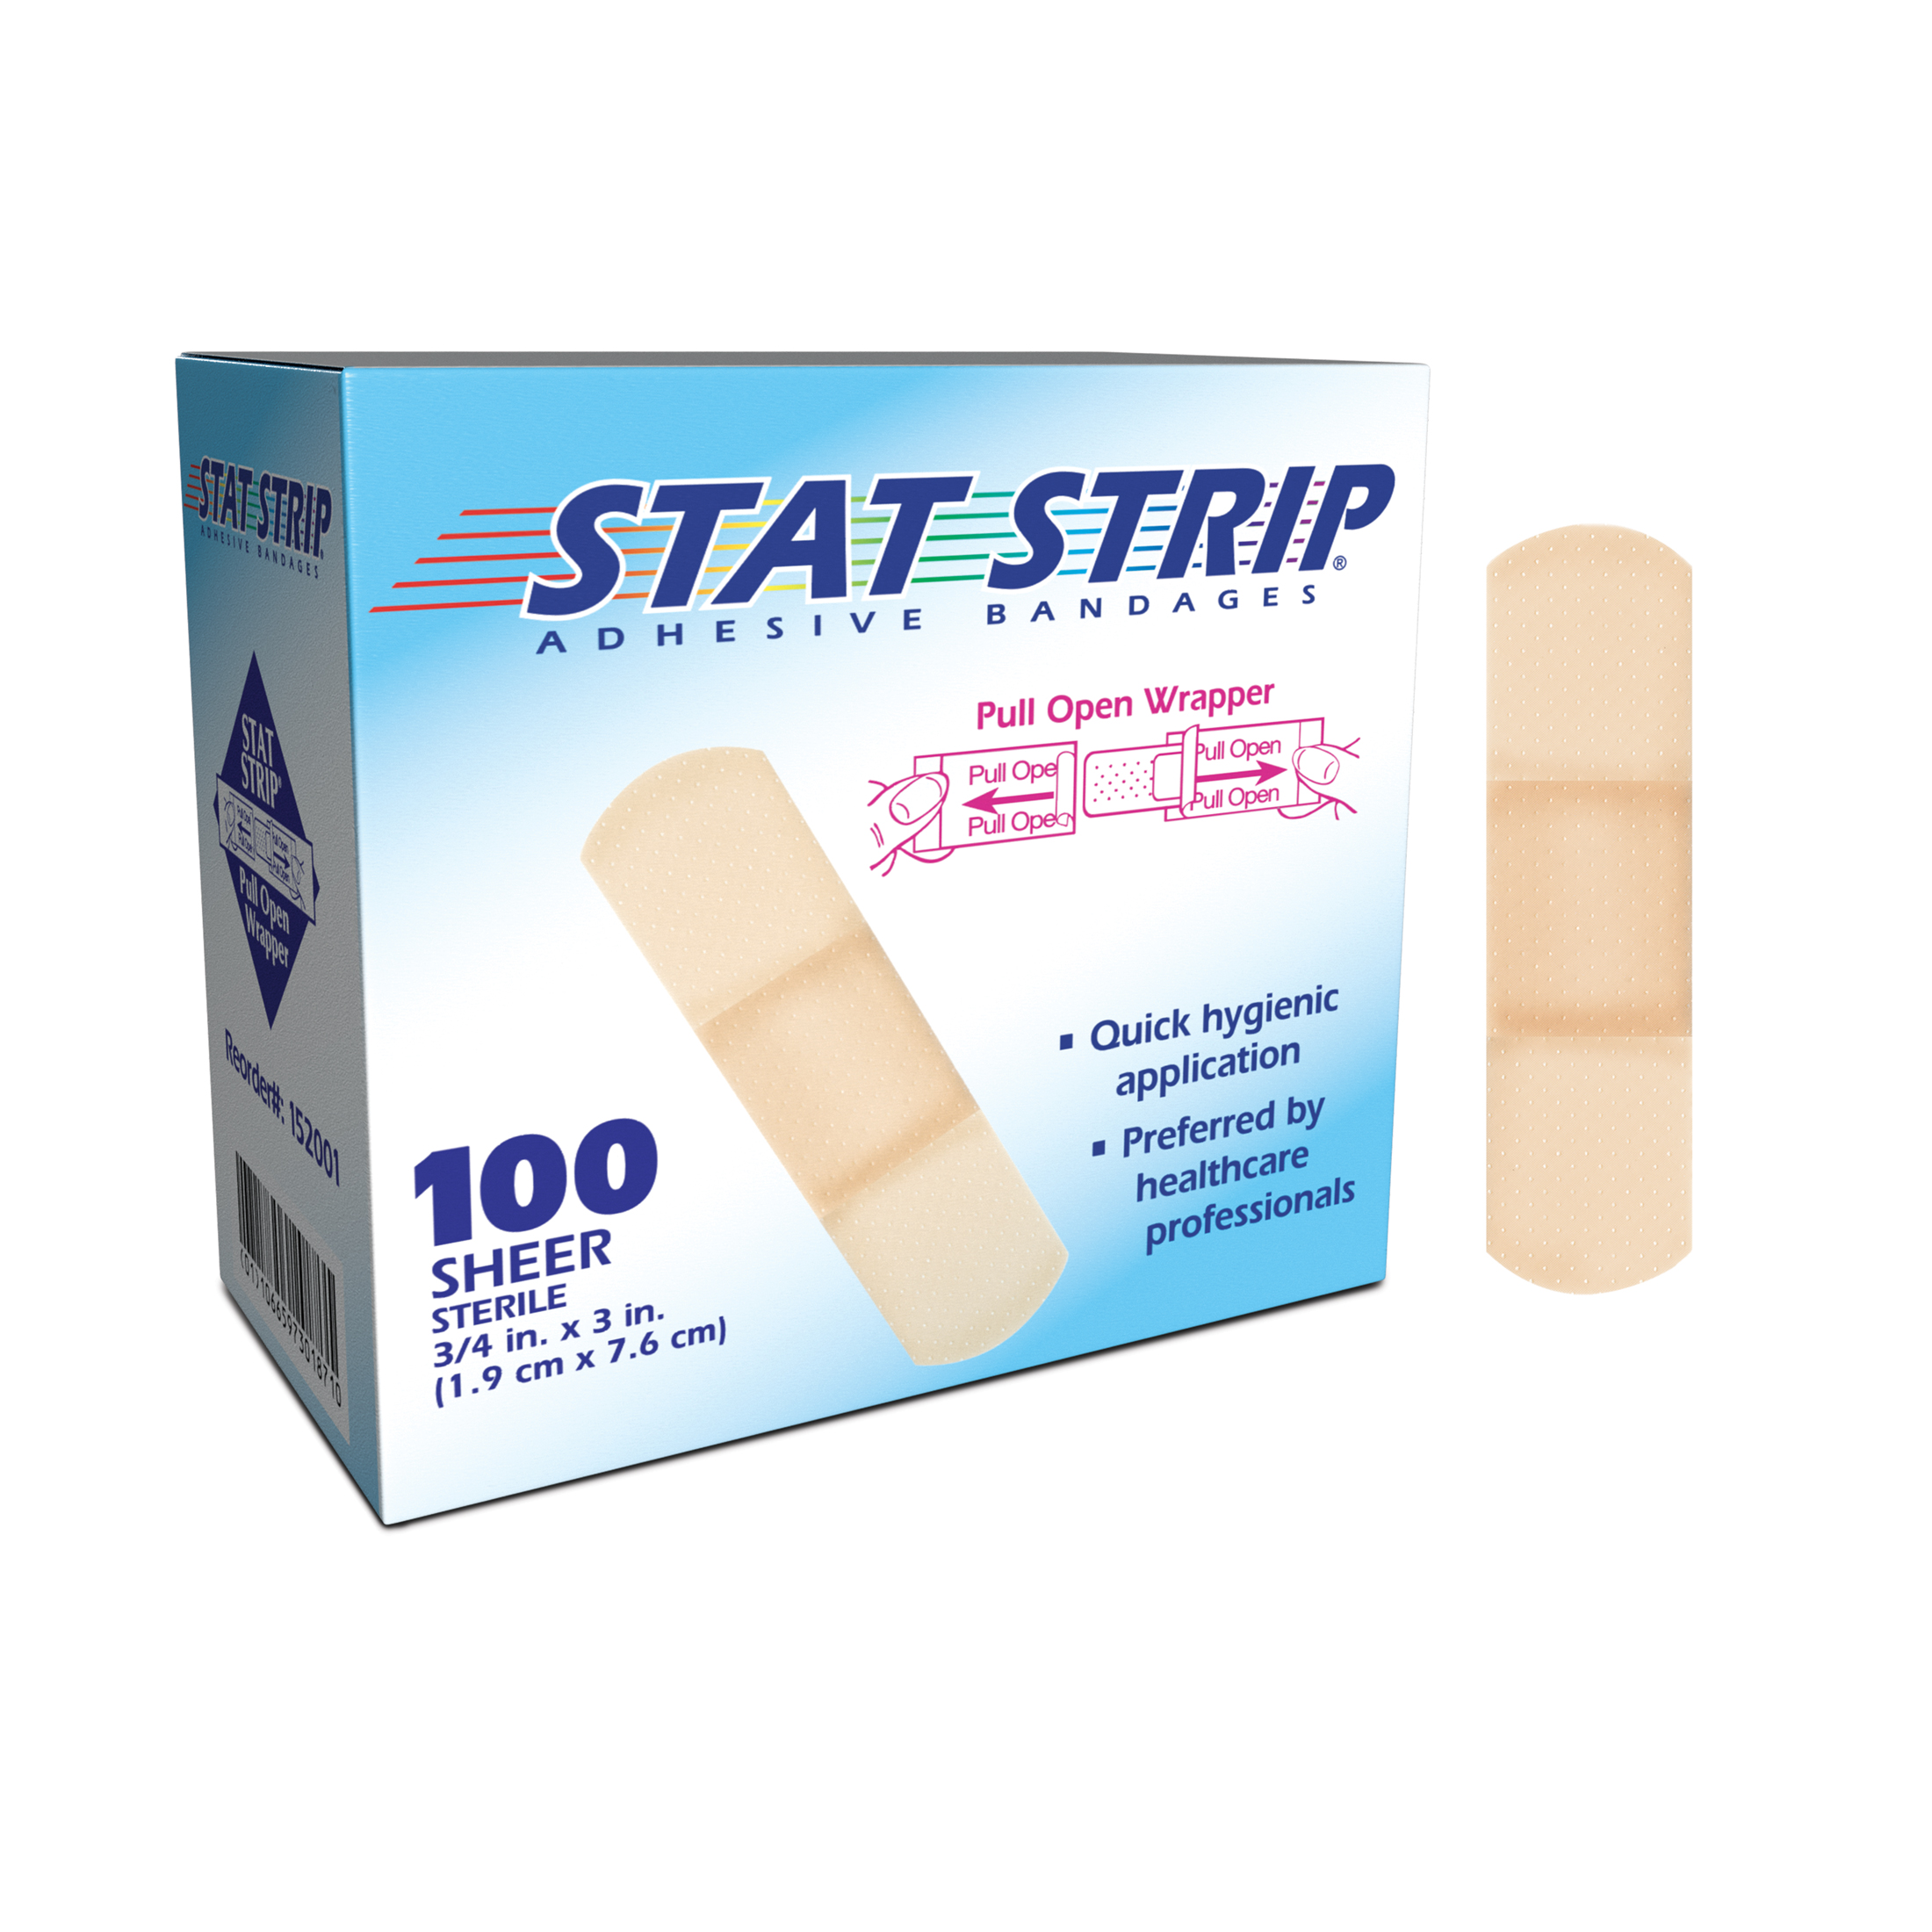 3/4" x 3" Adhesive Bandages Products, Supplies and Equipment